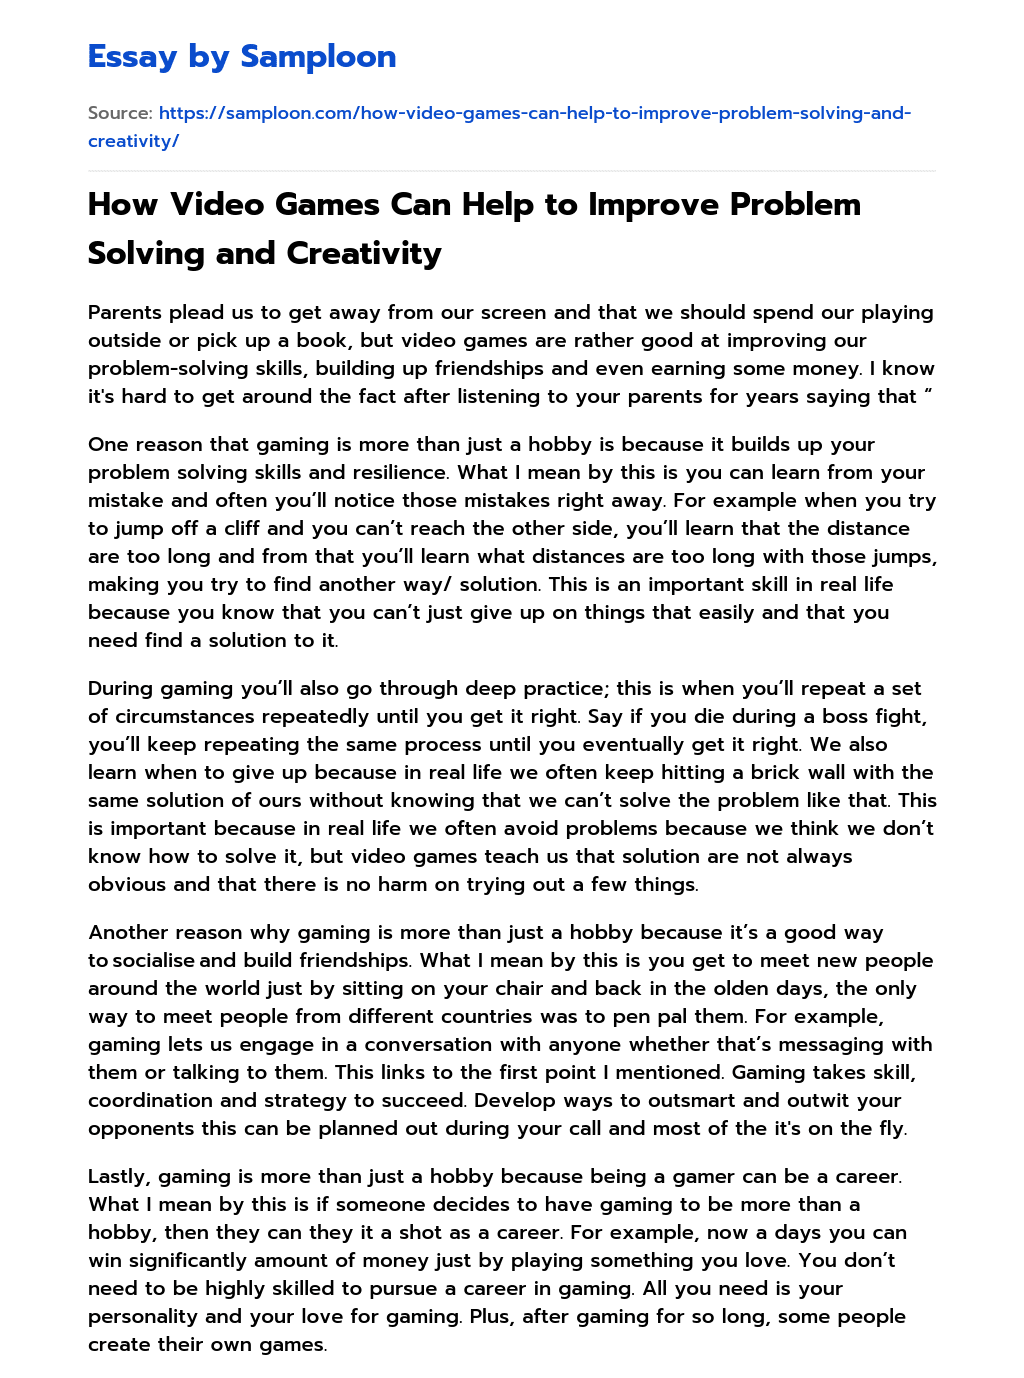 How Video Games Can Help to Improve Problem Solving and Creativity essay